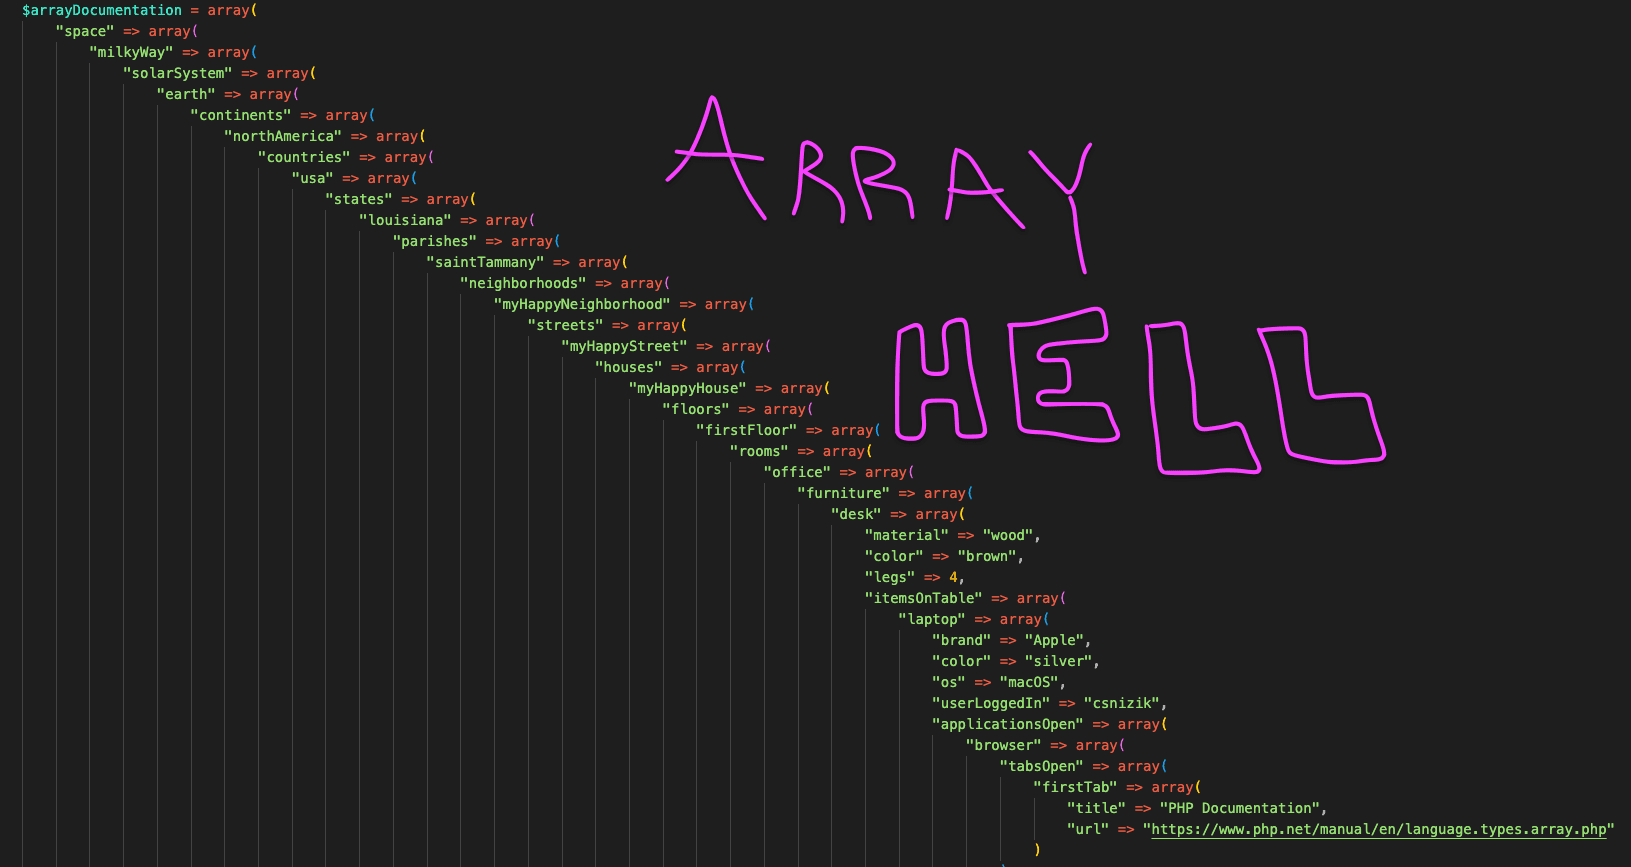 Huge and ridiculously complex associative array in PHP